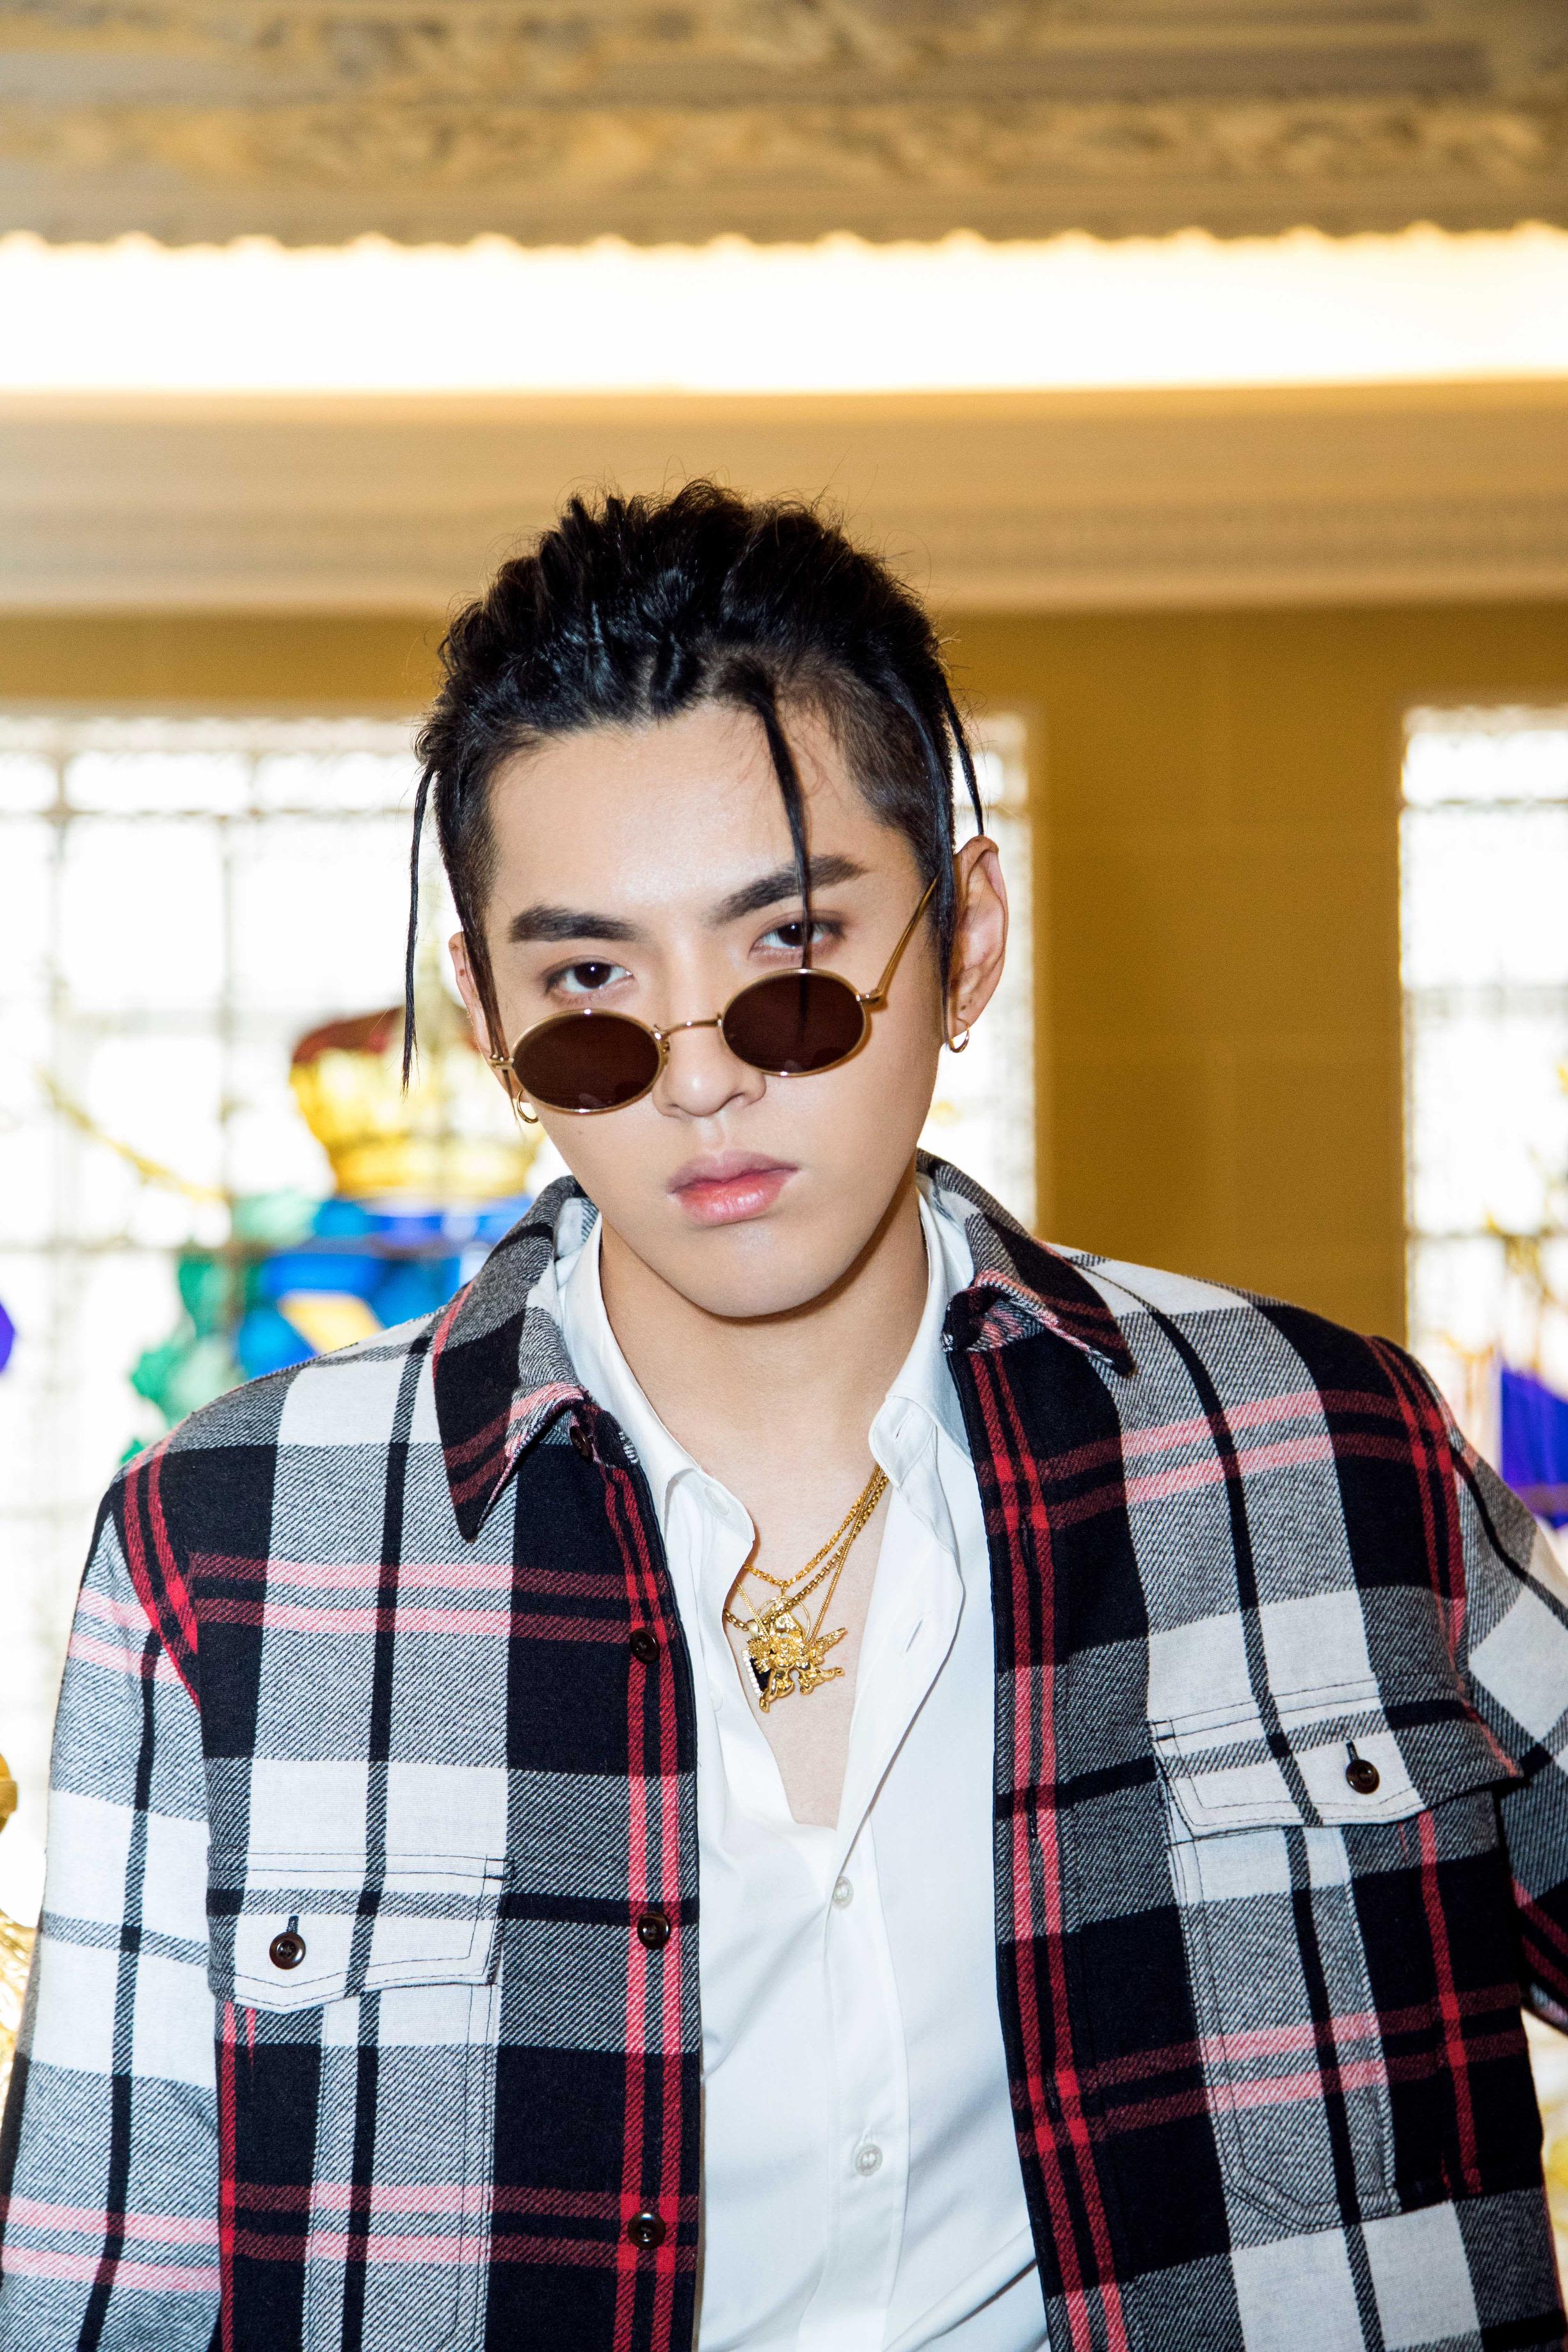 7 movies that proves Kris Wu is one of China's top film stars 